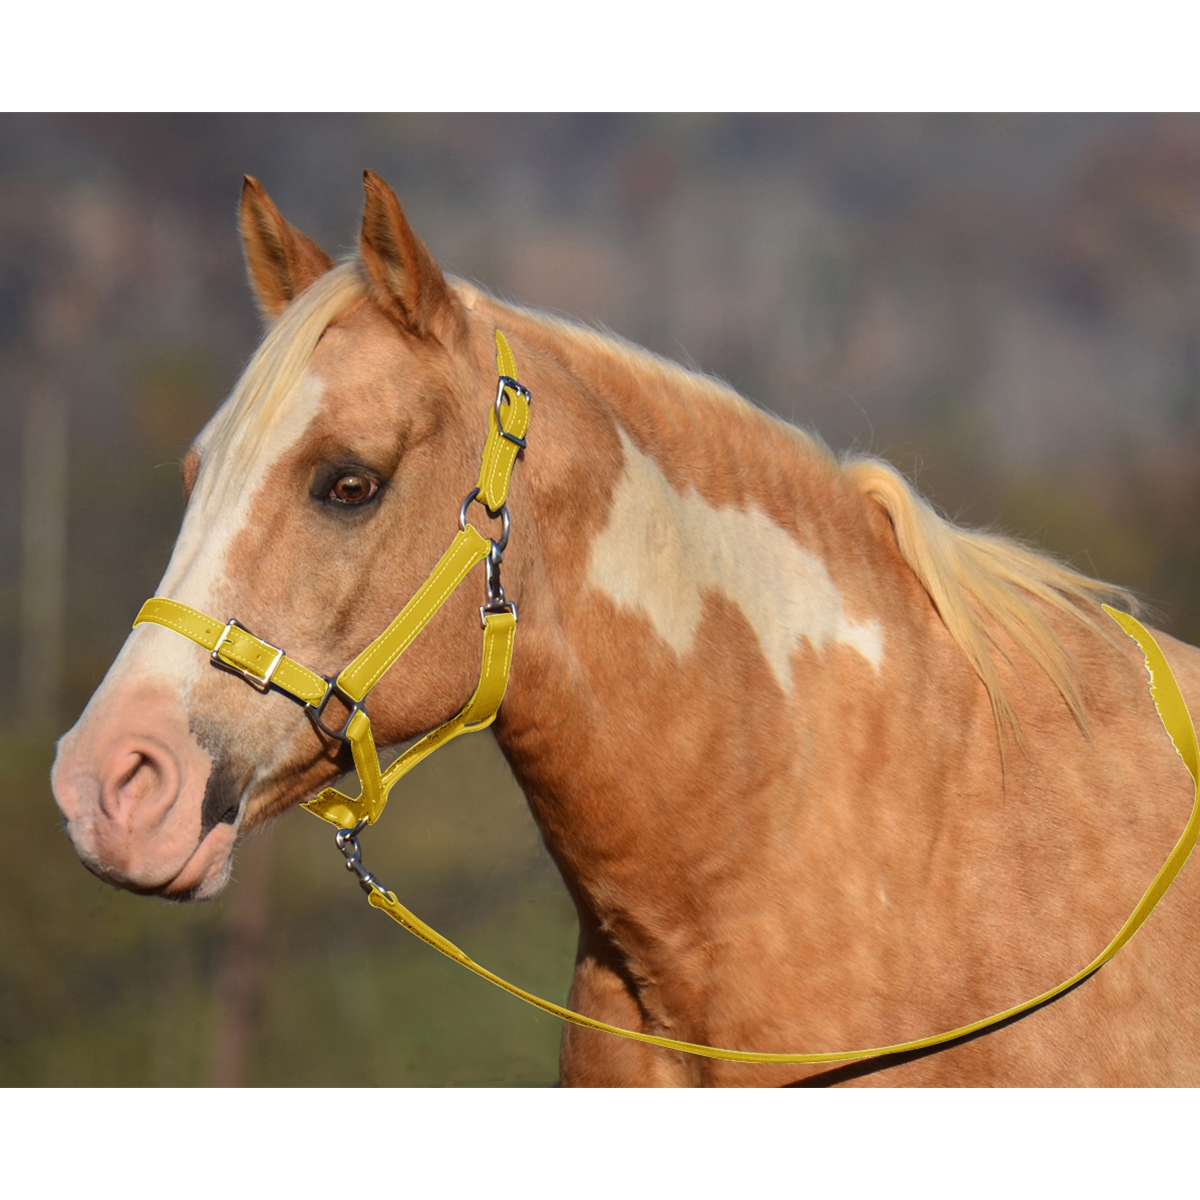 SUNFLOWER YELLOW Buckle Nose Safety HALTER & LEAD made from BETA BIOTHANE